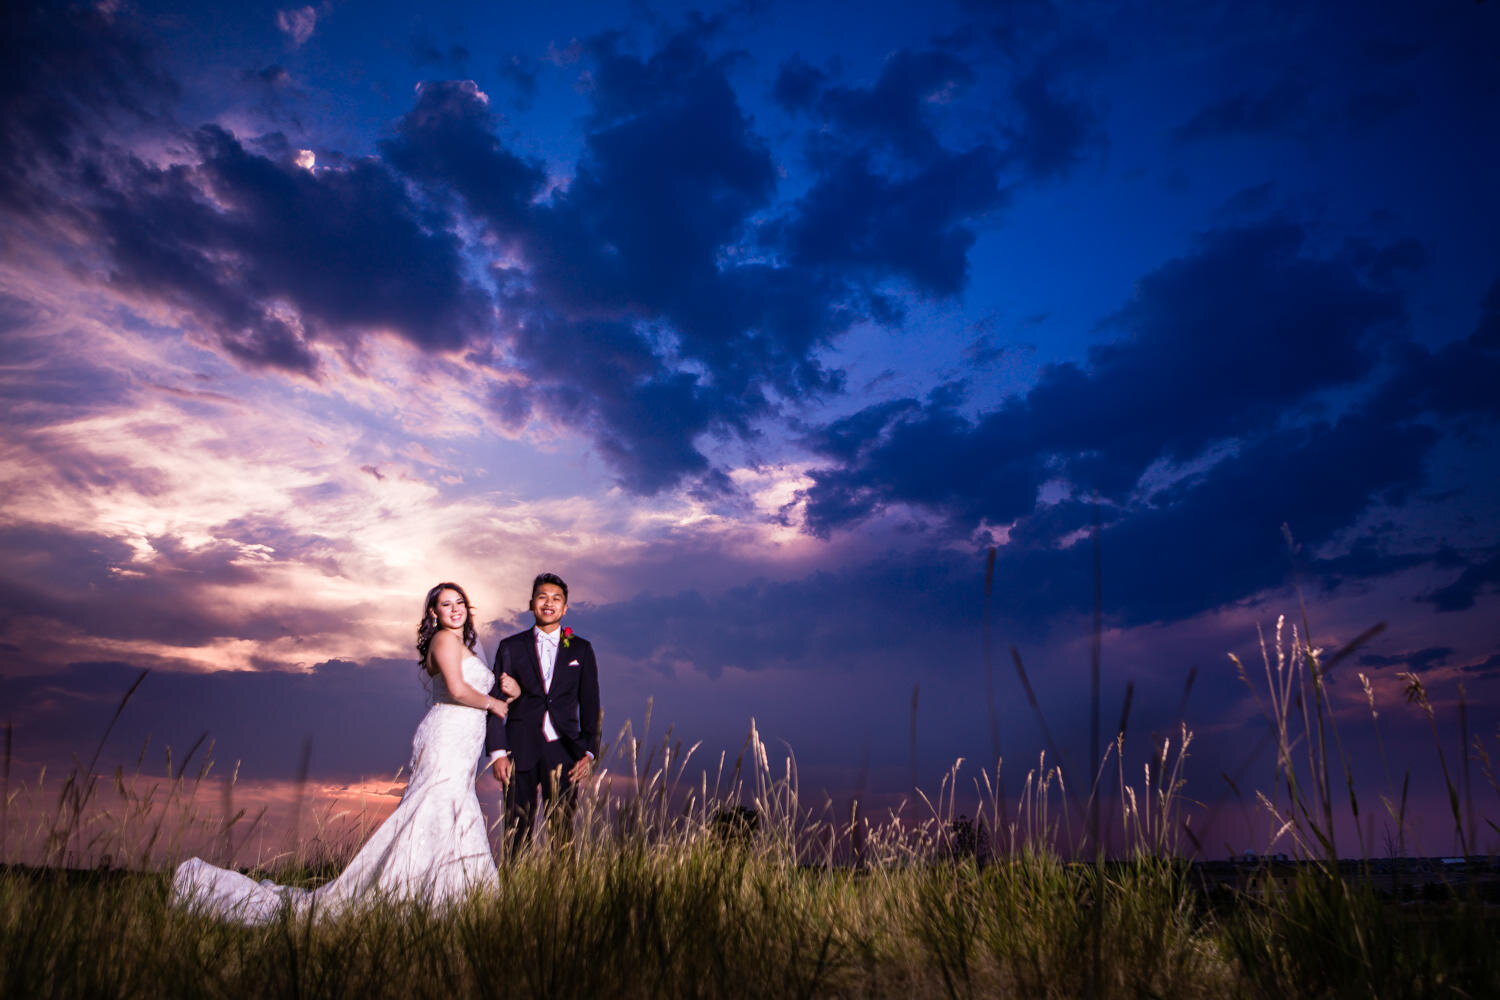  Blackstone Country Club wedding by JMGant Photography. This has got to be one of the most amazing sunsets ever! 